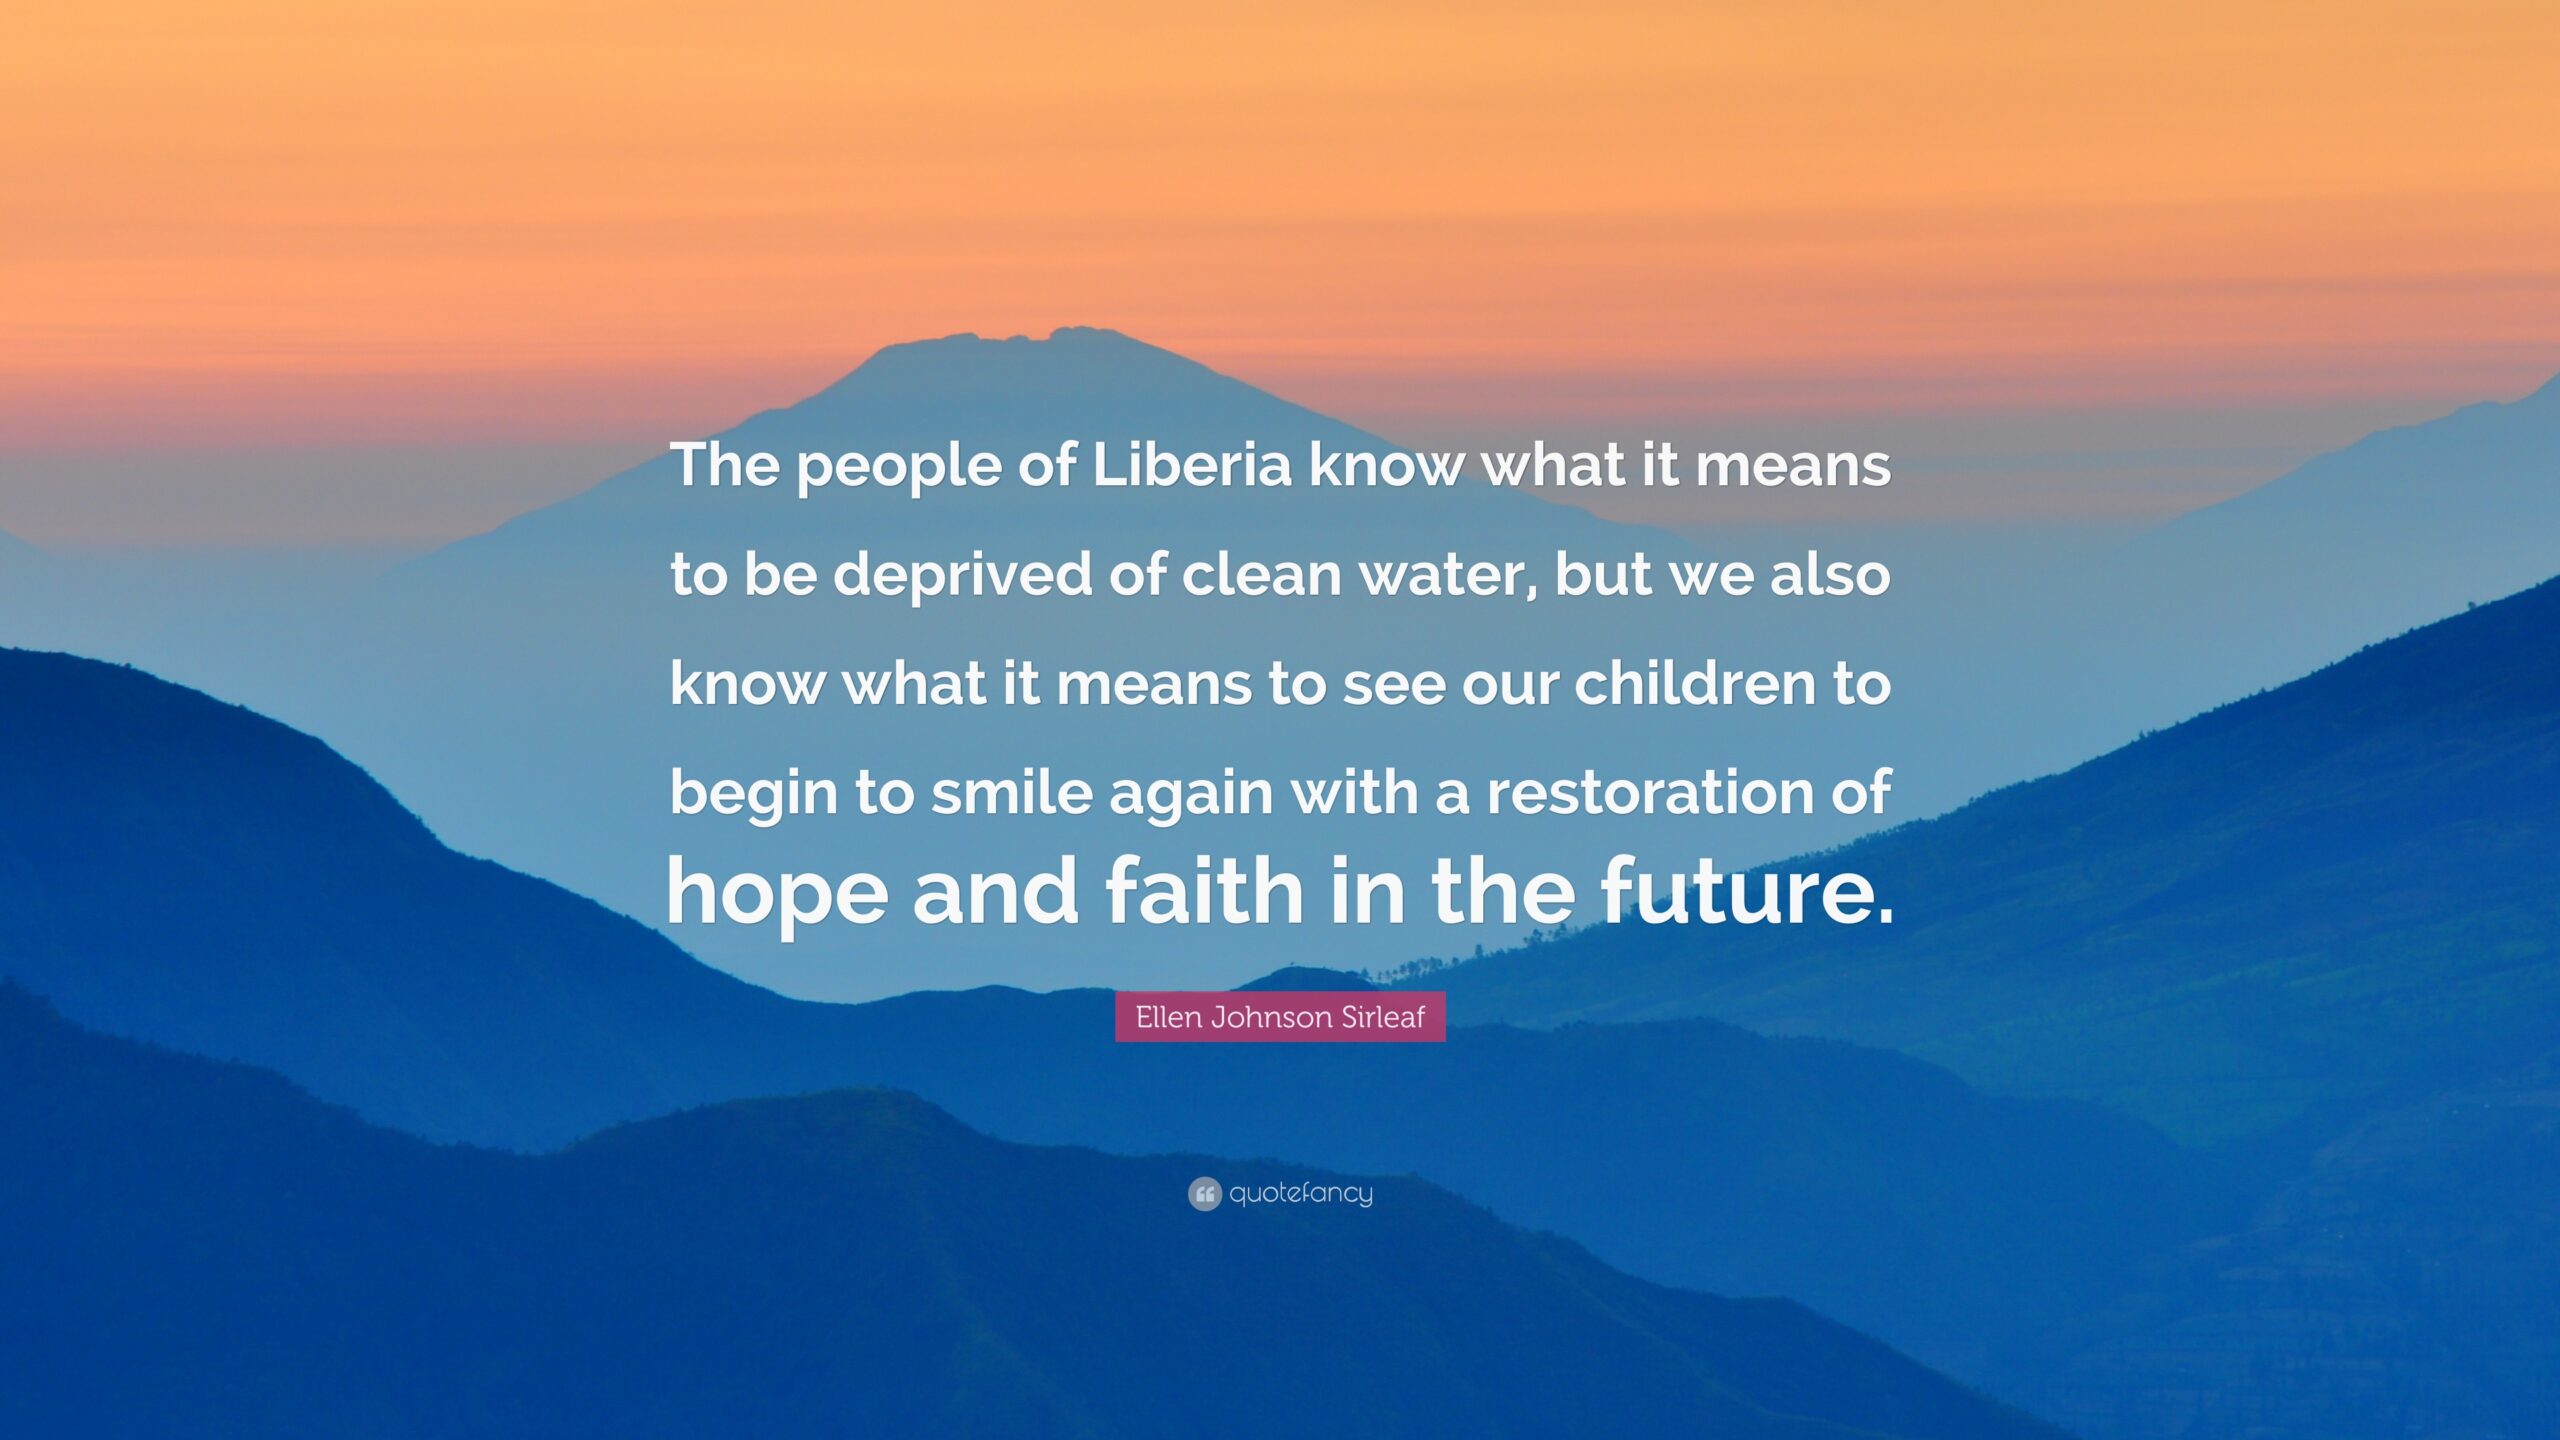 Ellen Johnson Sirleaf Quote: “The people of Liberia know what it